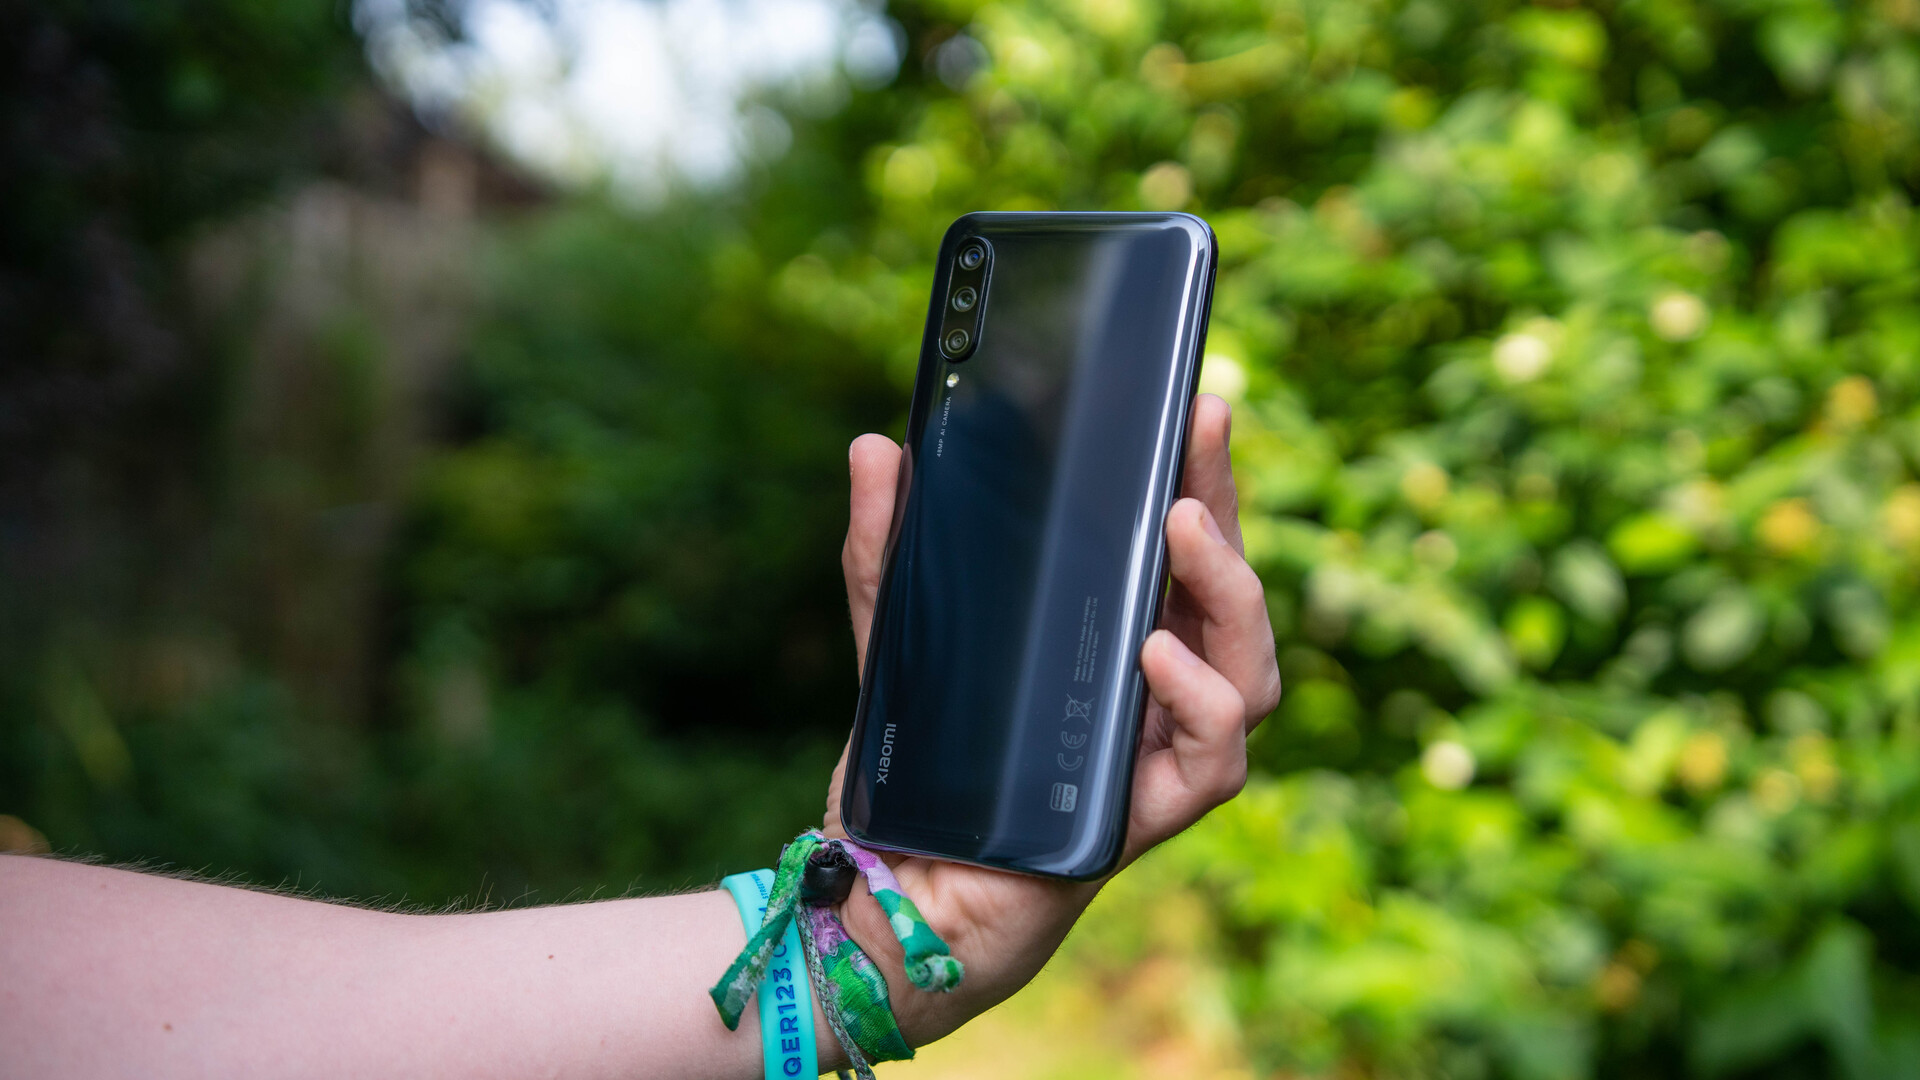 Xiaomi Mi A3 Chassis rear view in hand